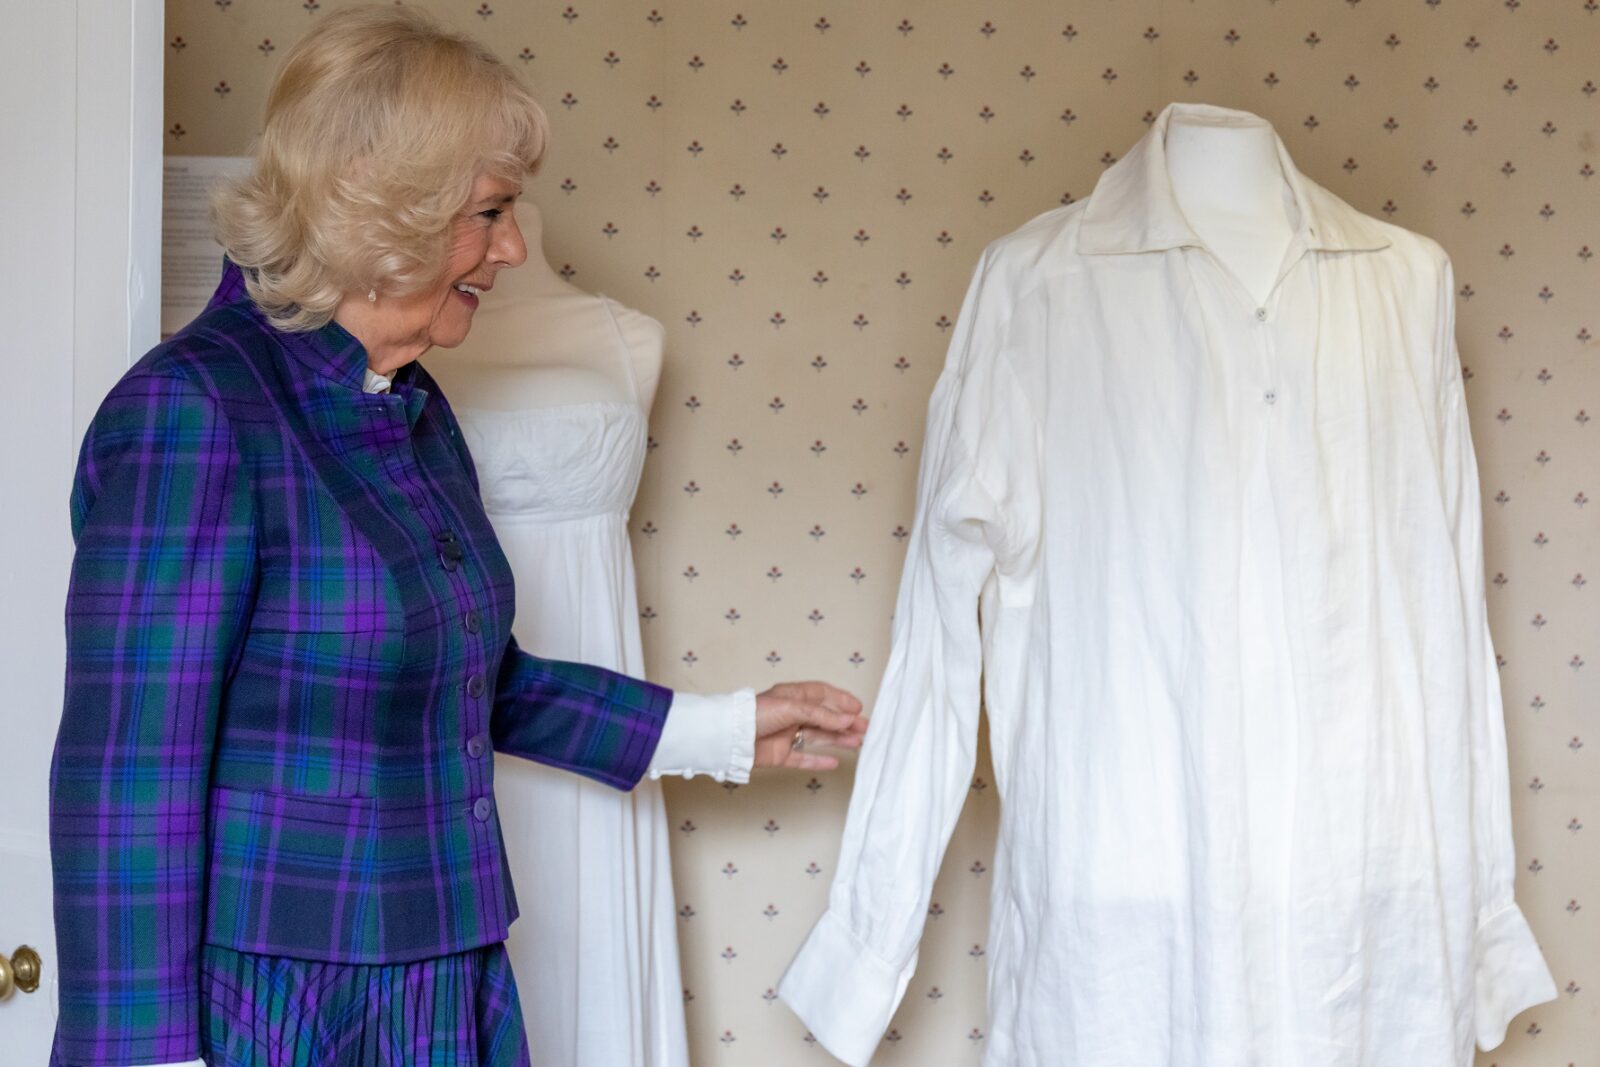 HRH The Duchess of Cornwall with the iconic Mr Darcy shirt, worn by Colin Firth in the 1995 BBC adaptation of Pride and Prejudice